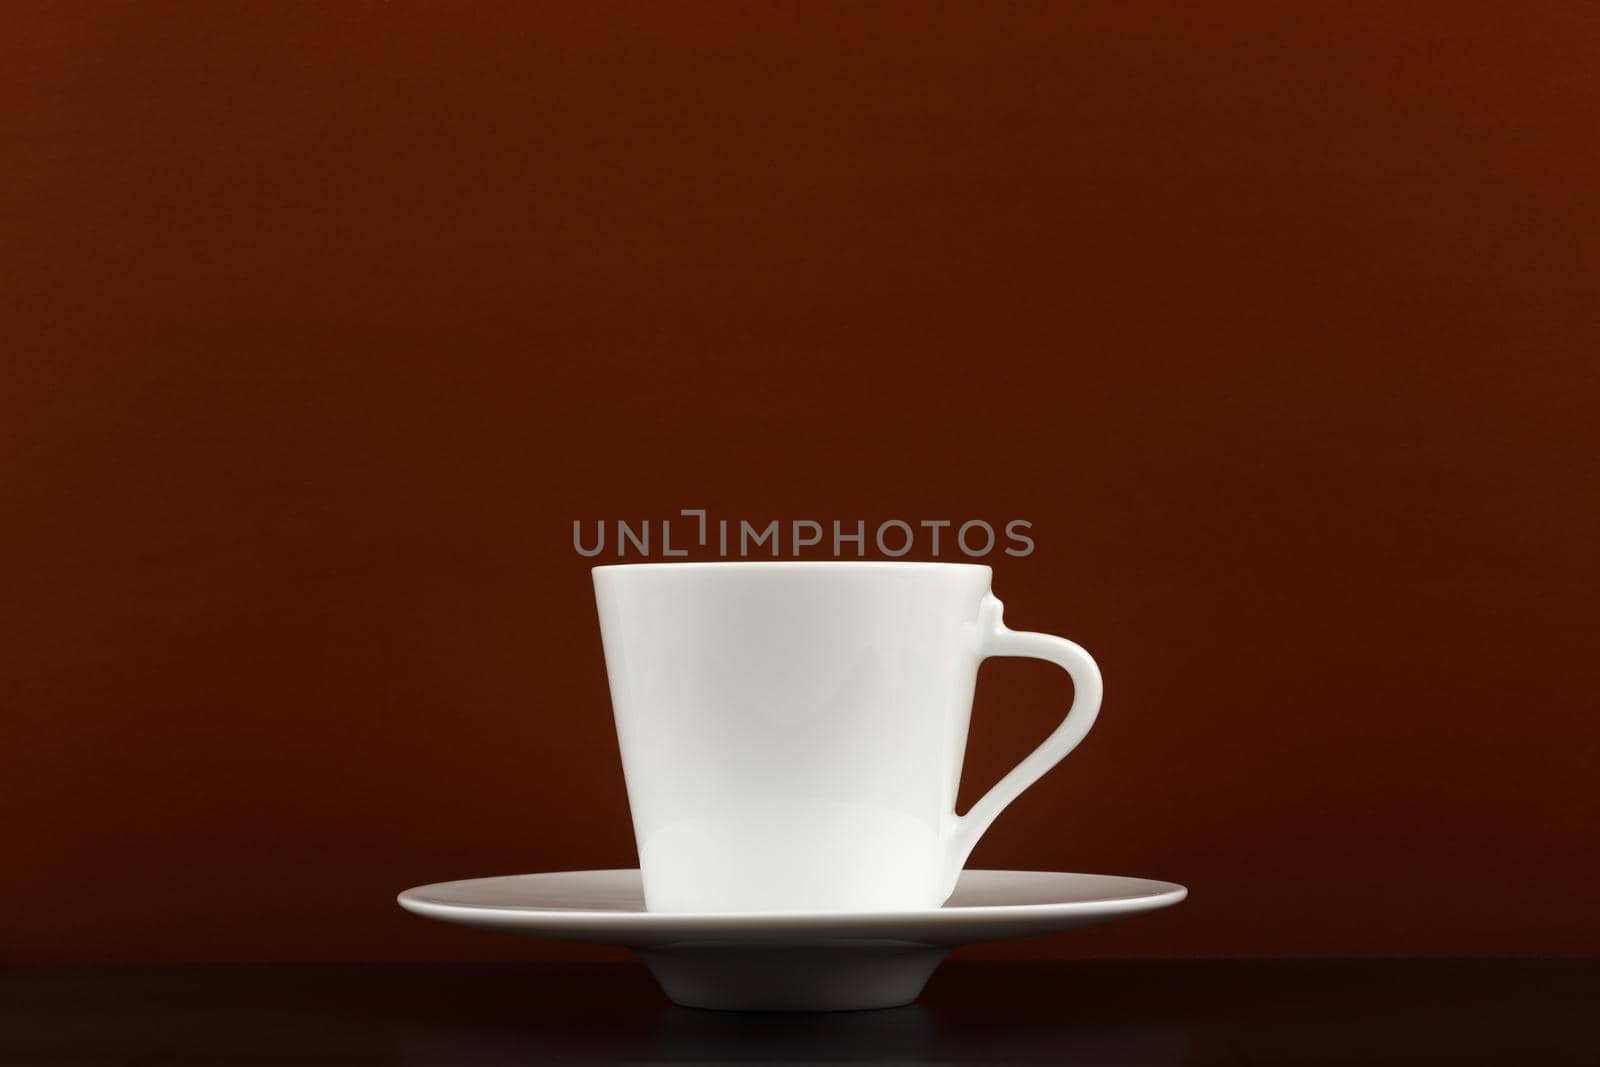 Minimalistic dark still life with white glossy cup of coffee on black table against dark brown background with copy space. High quality photo